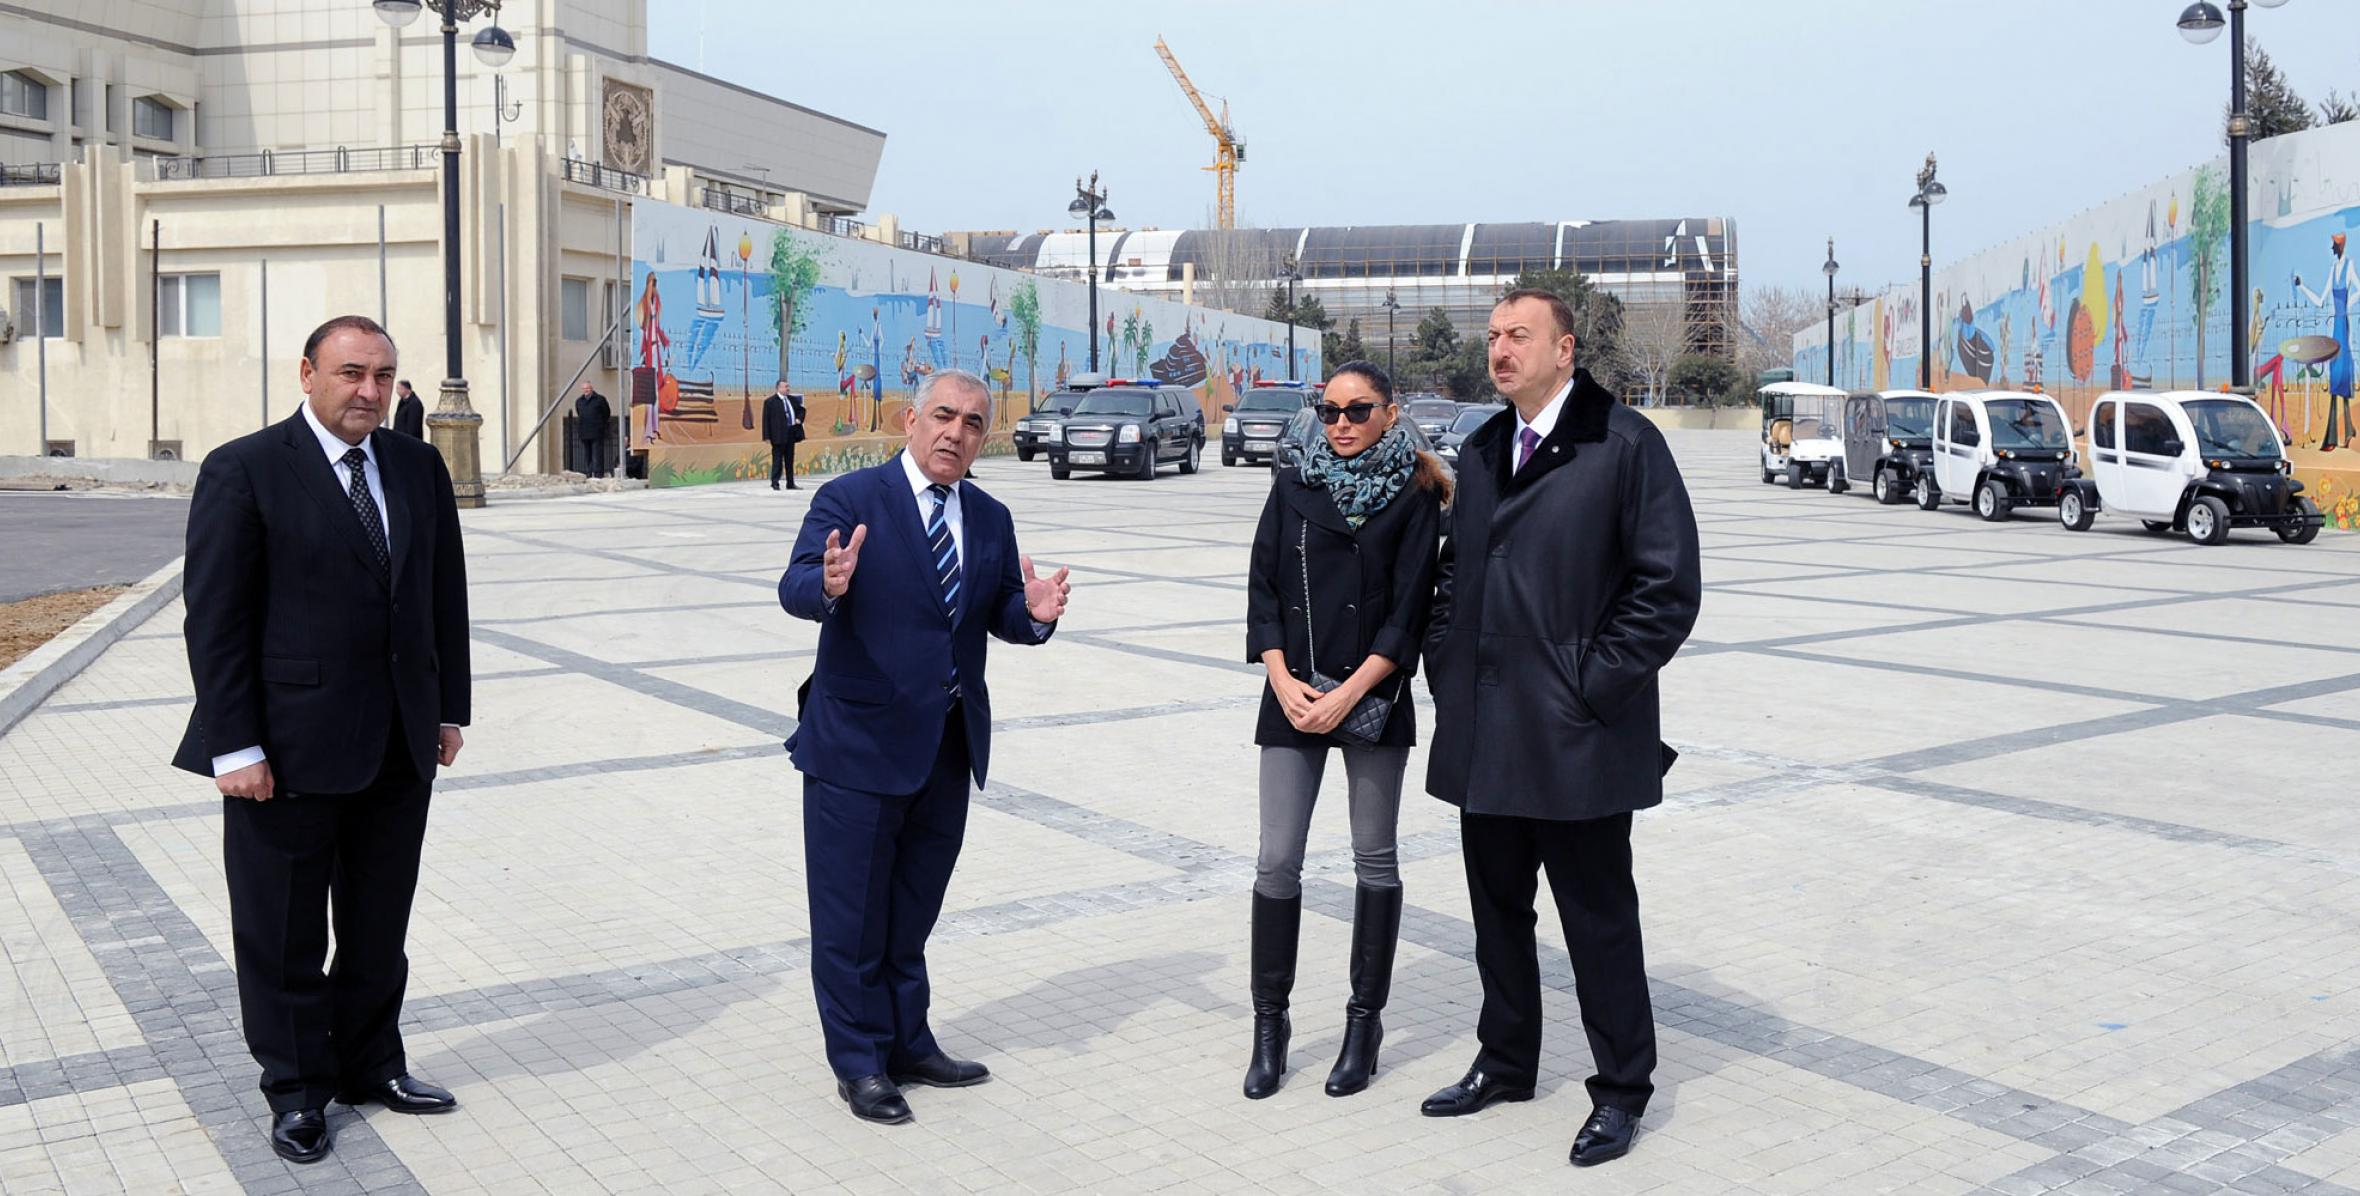 Ilham Aliyev reviewed the progress of construction in the State Flag Square and the Sports and Concert Center